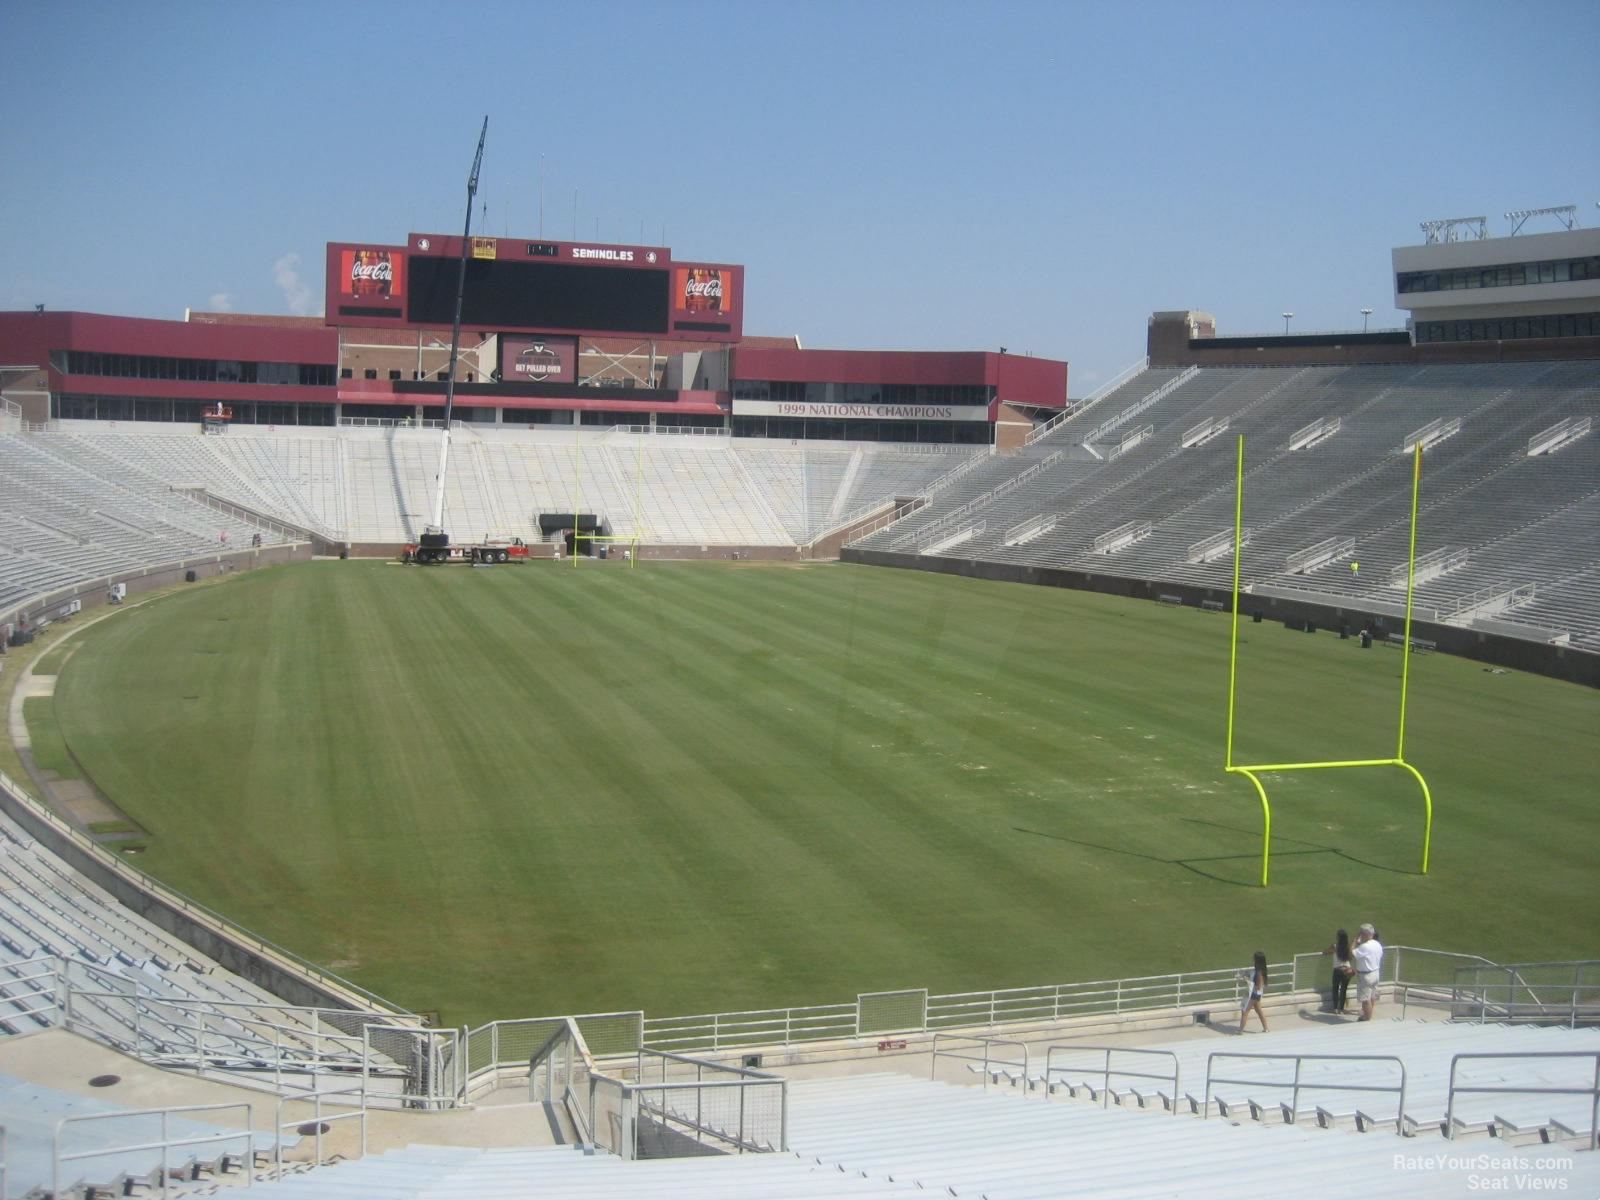 section 122, row 40 seat view  - doak campbell stadium